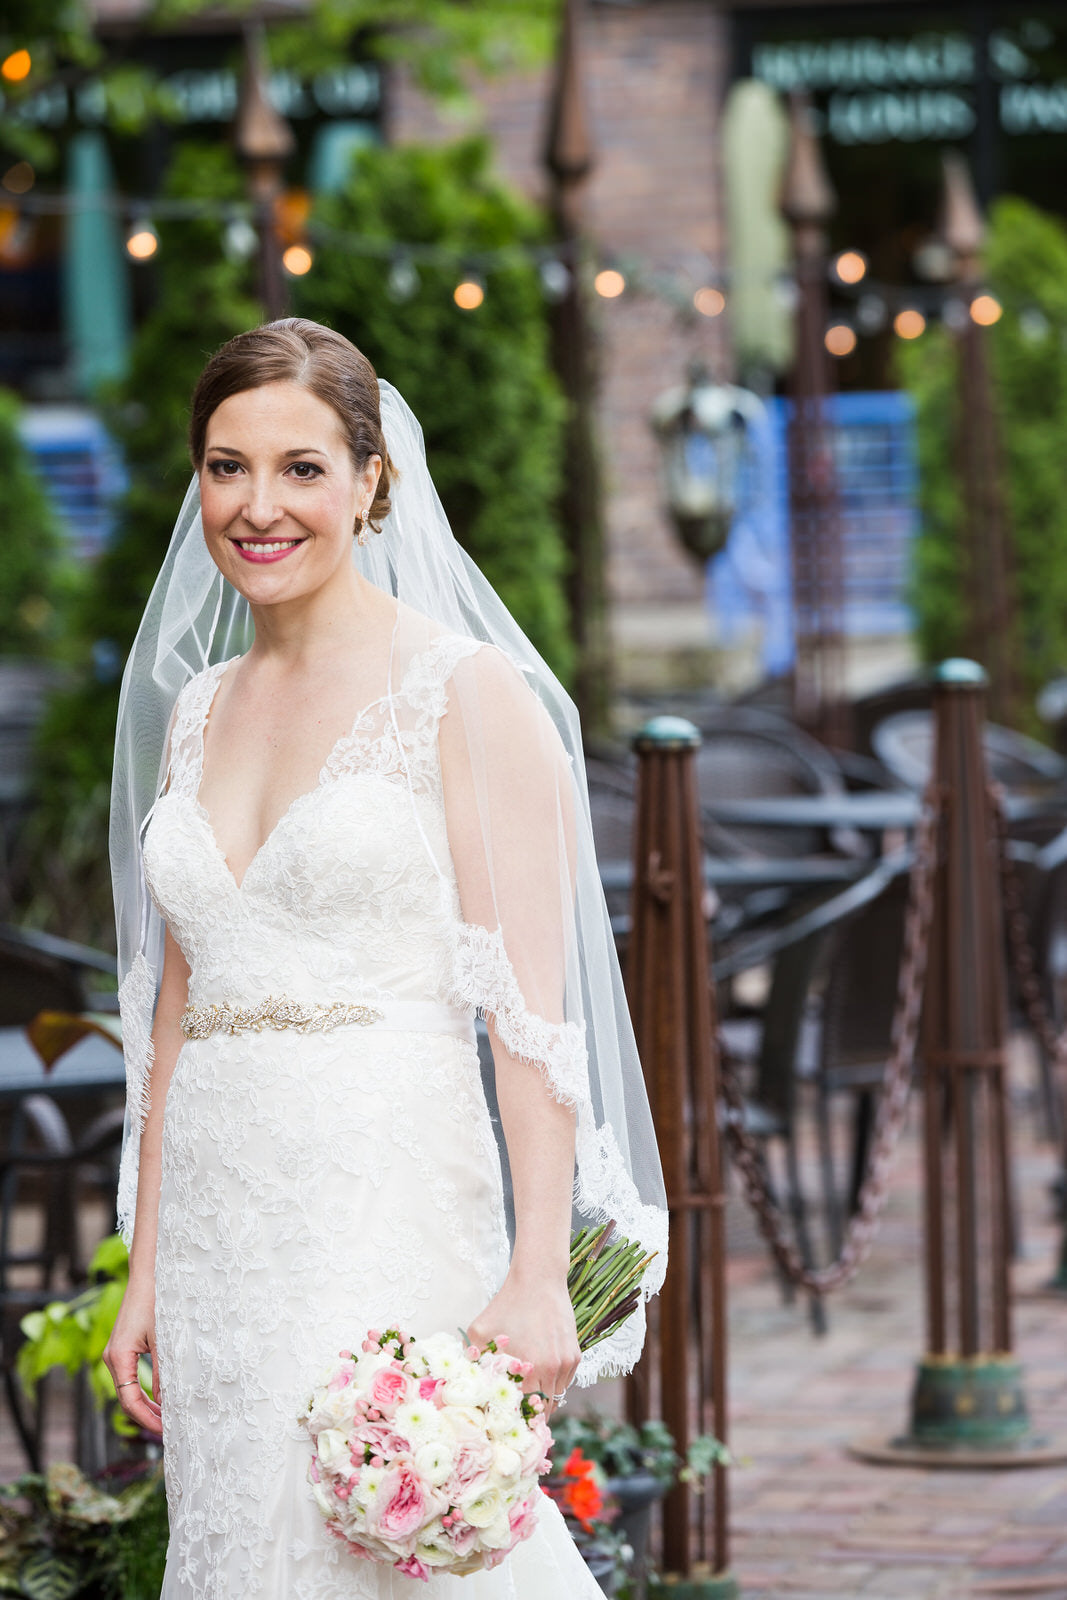 New Orleans wedding and fingertip length lace veil